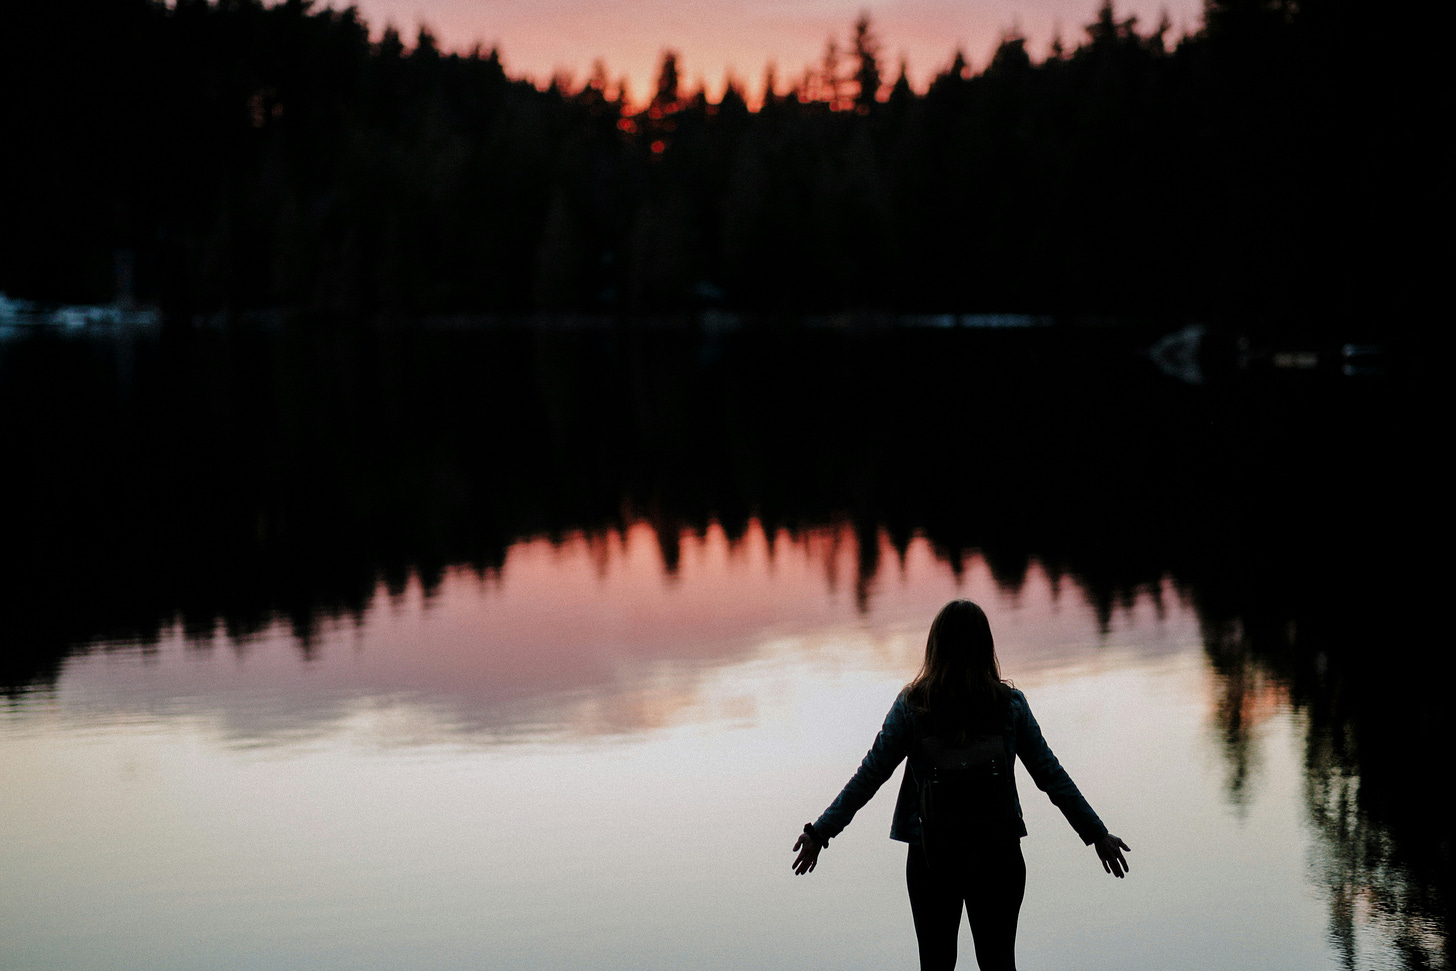 Image of woman with arms slightly extended overlooking a lake at dawn or dusk.